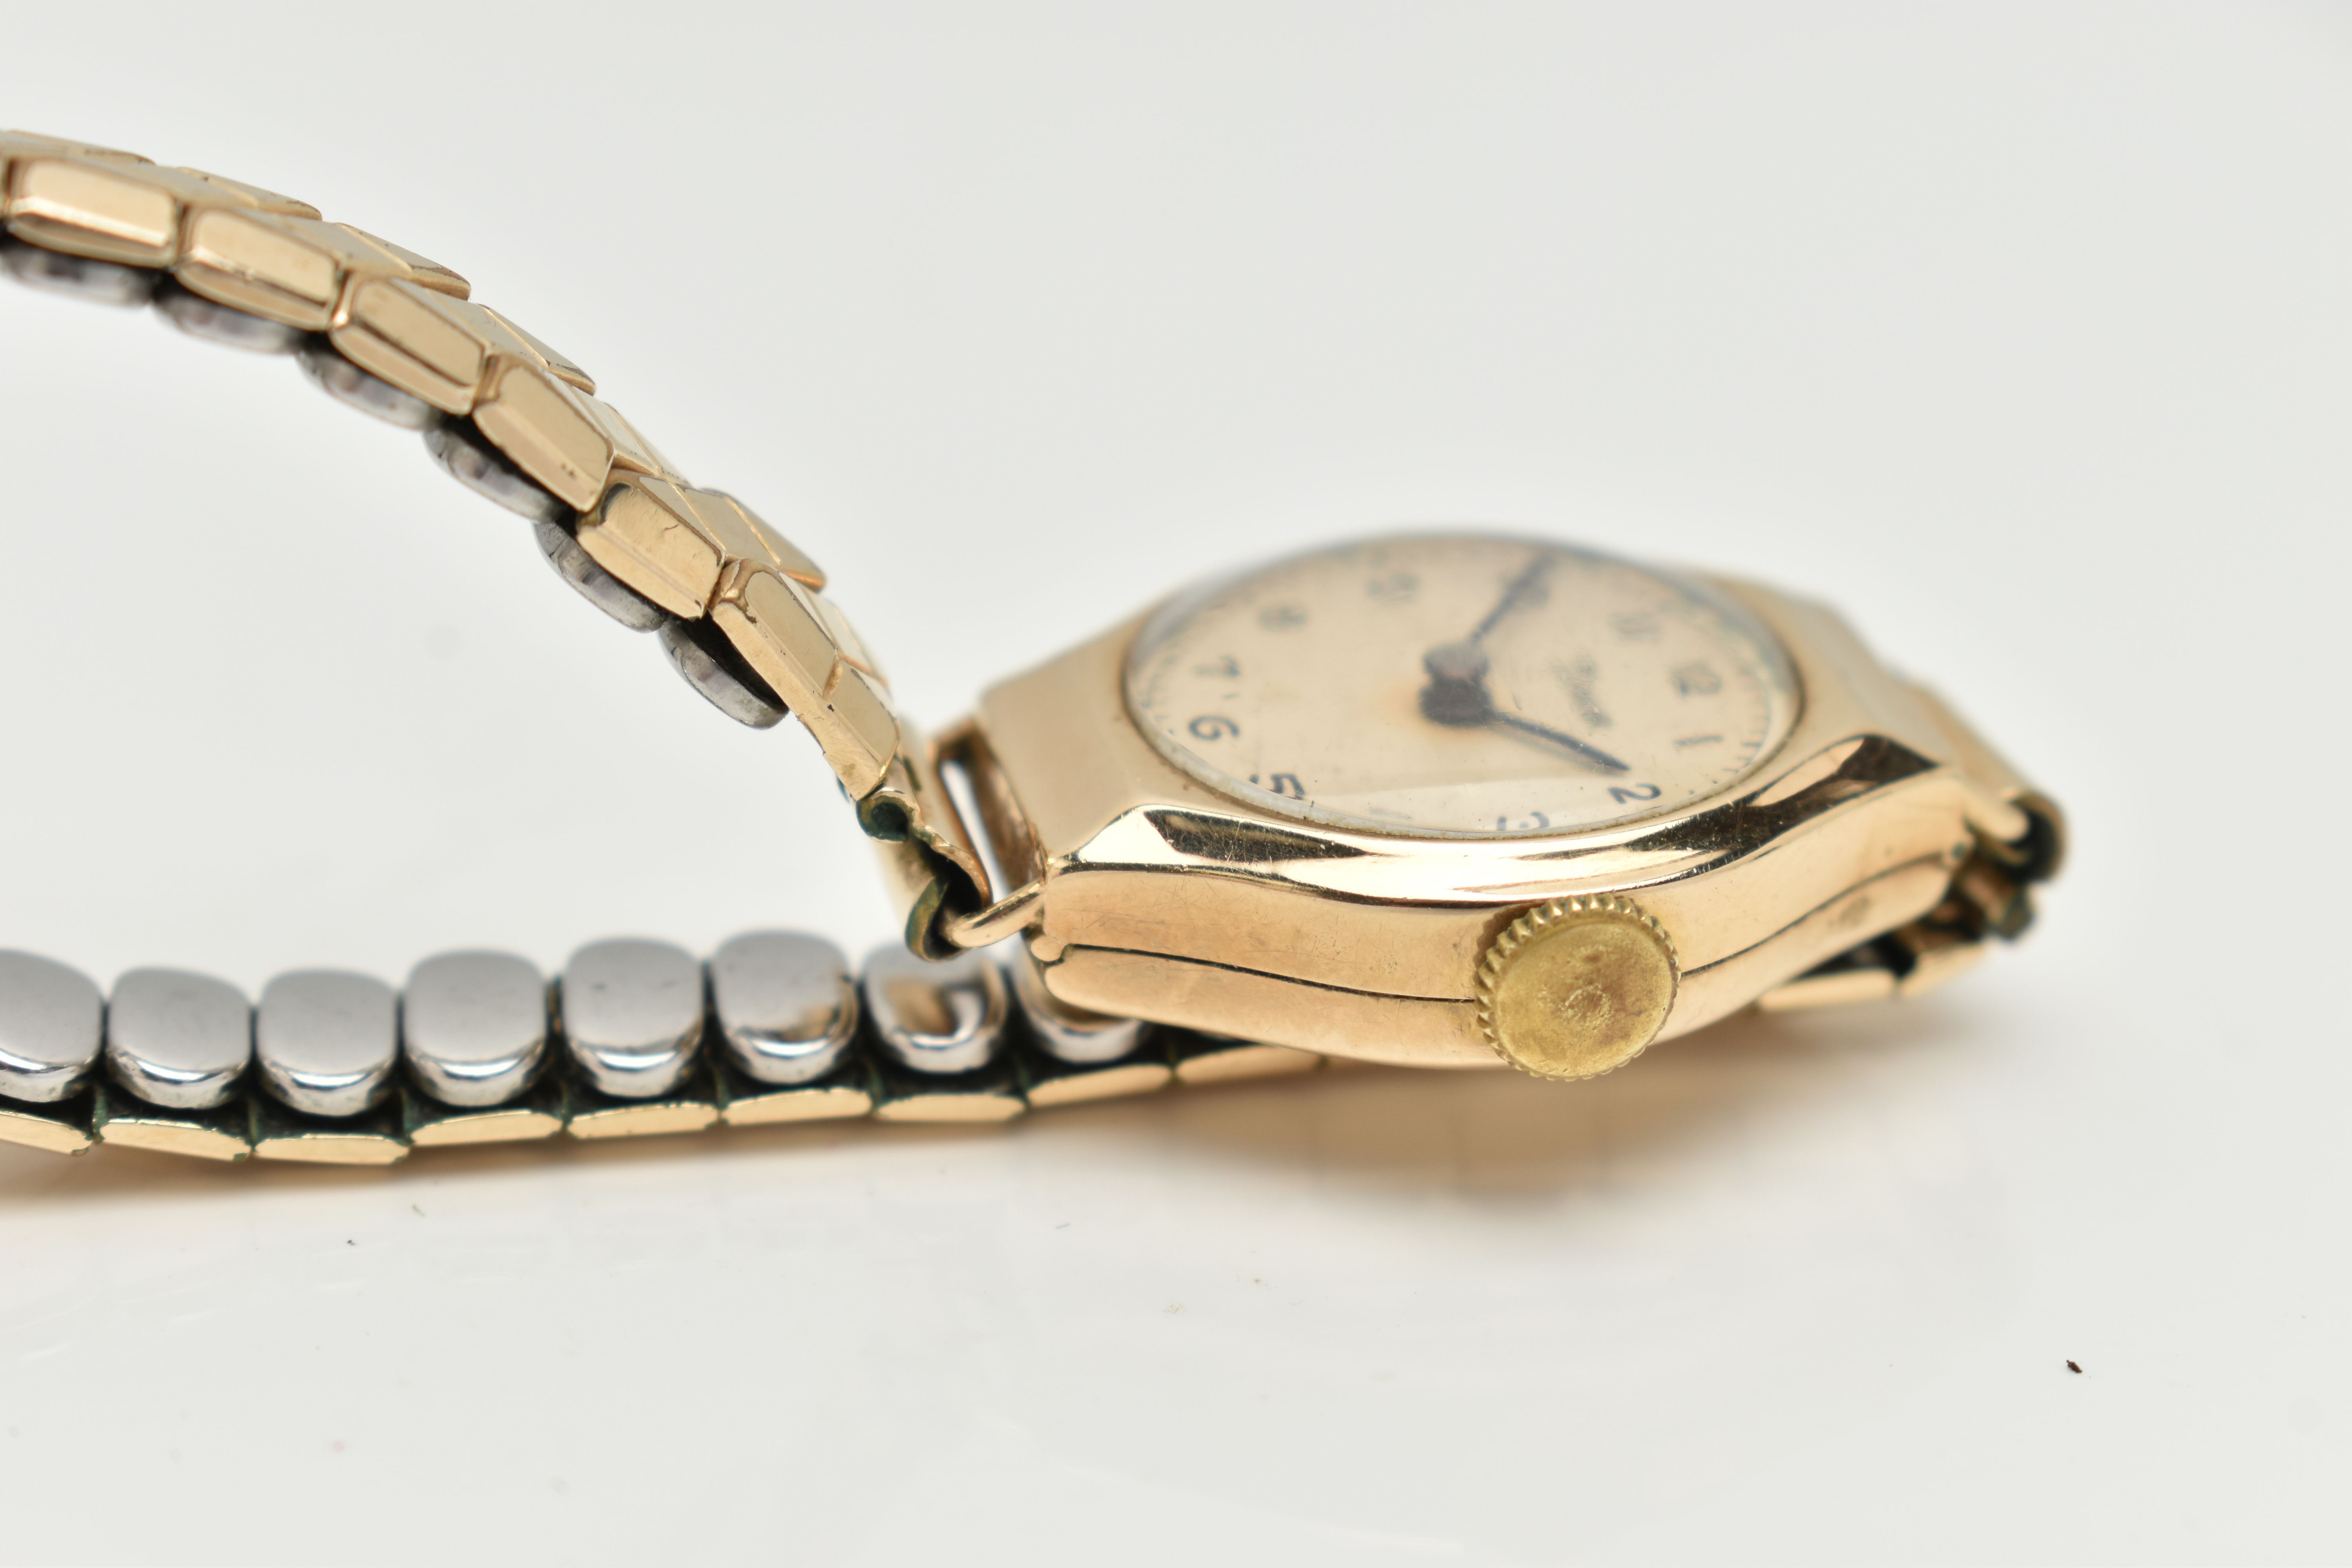 A 9CT GOLD LADIES WRISTWATCH, hand wound movement, round dial signed 'Timor', Arabic numerals, - Image 6 of 6